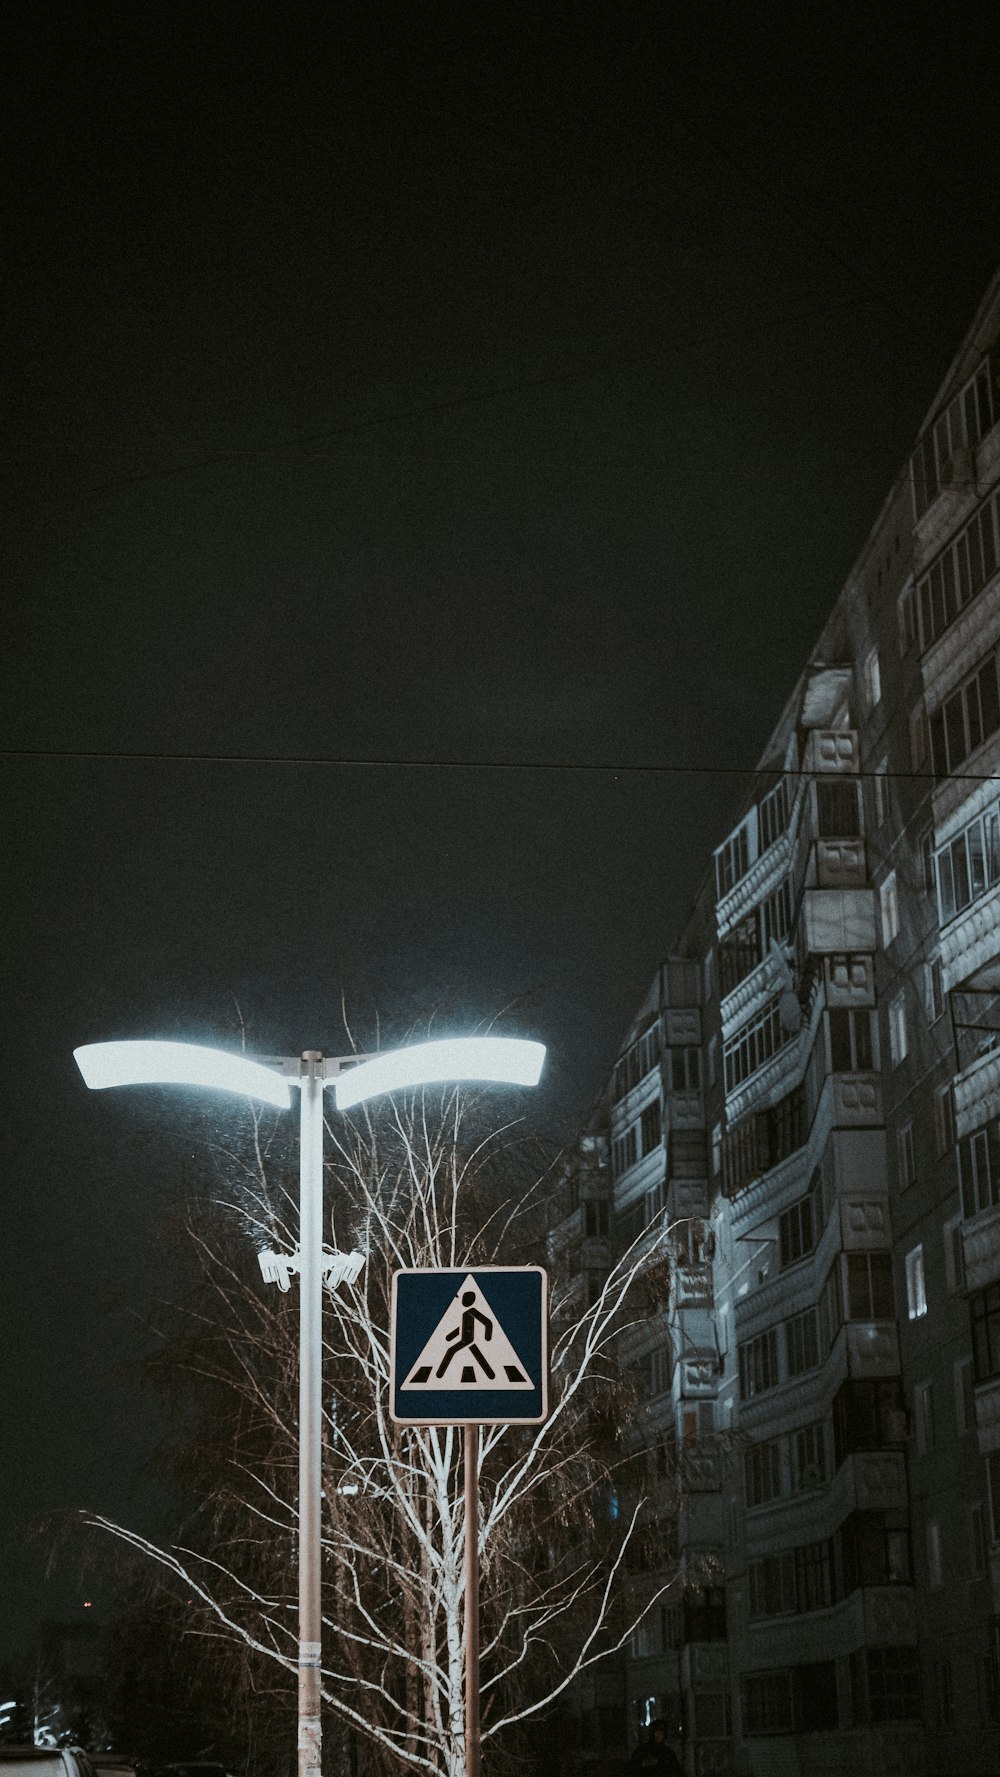 a street sign on a pole in front of a building